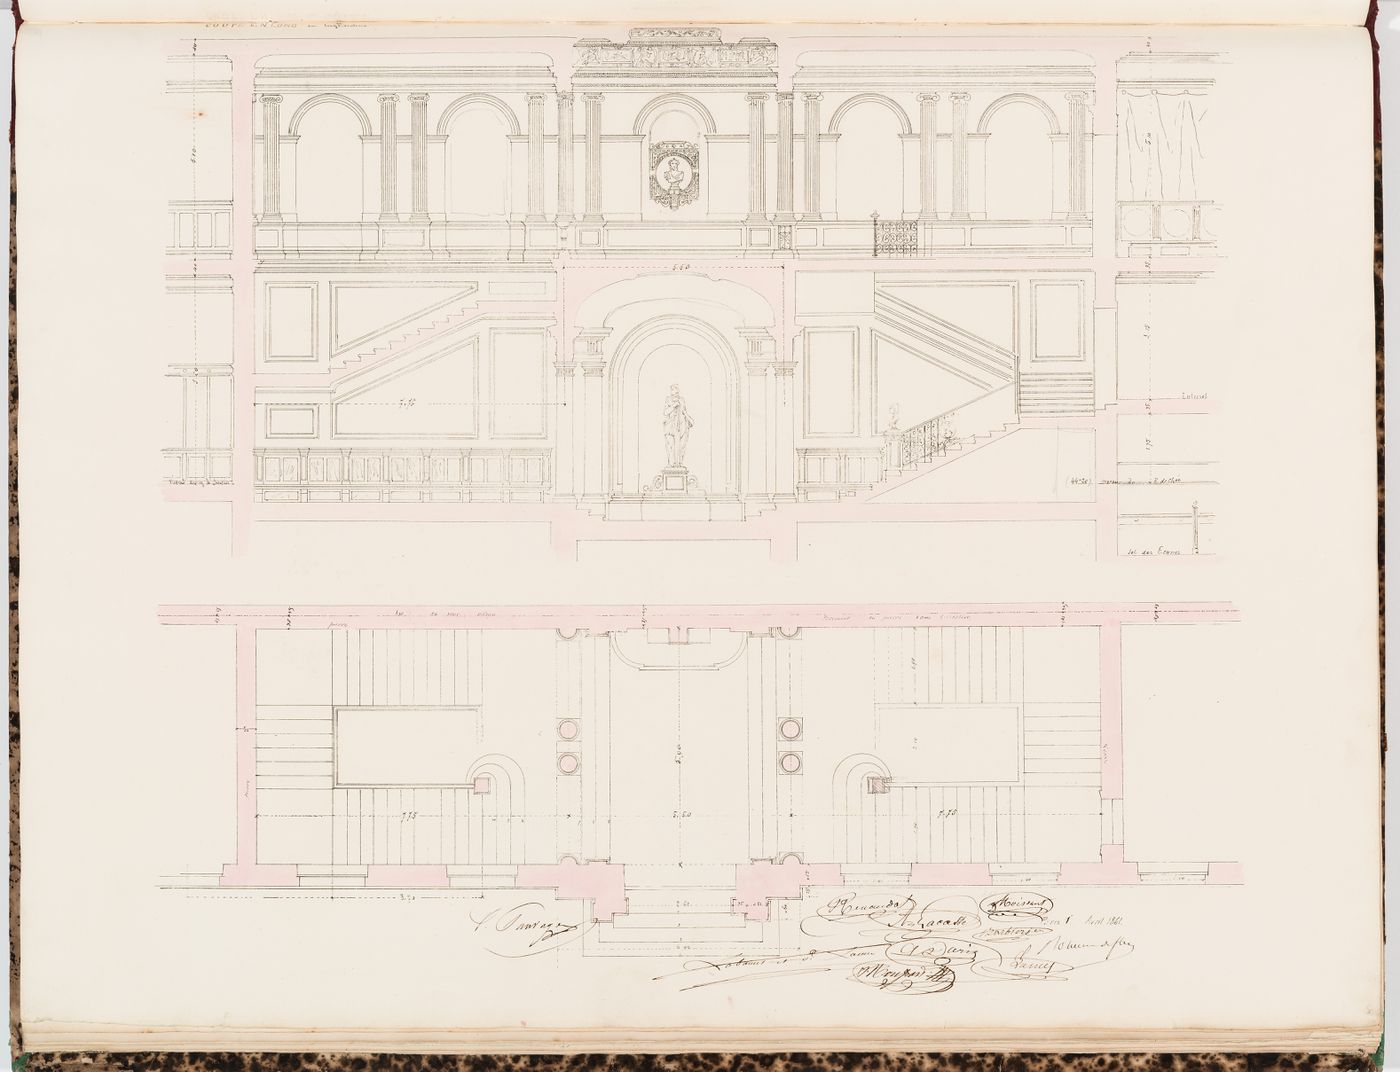 Longitudinal section and plan for the entrance hall and the main stairs, Hôtel Sauvage, Paris